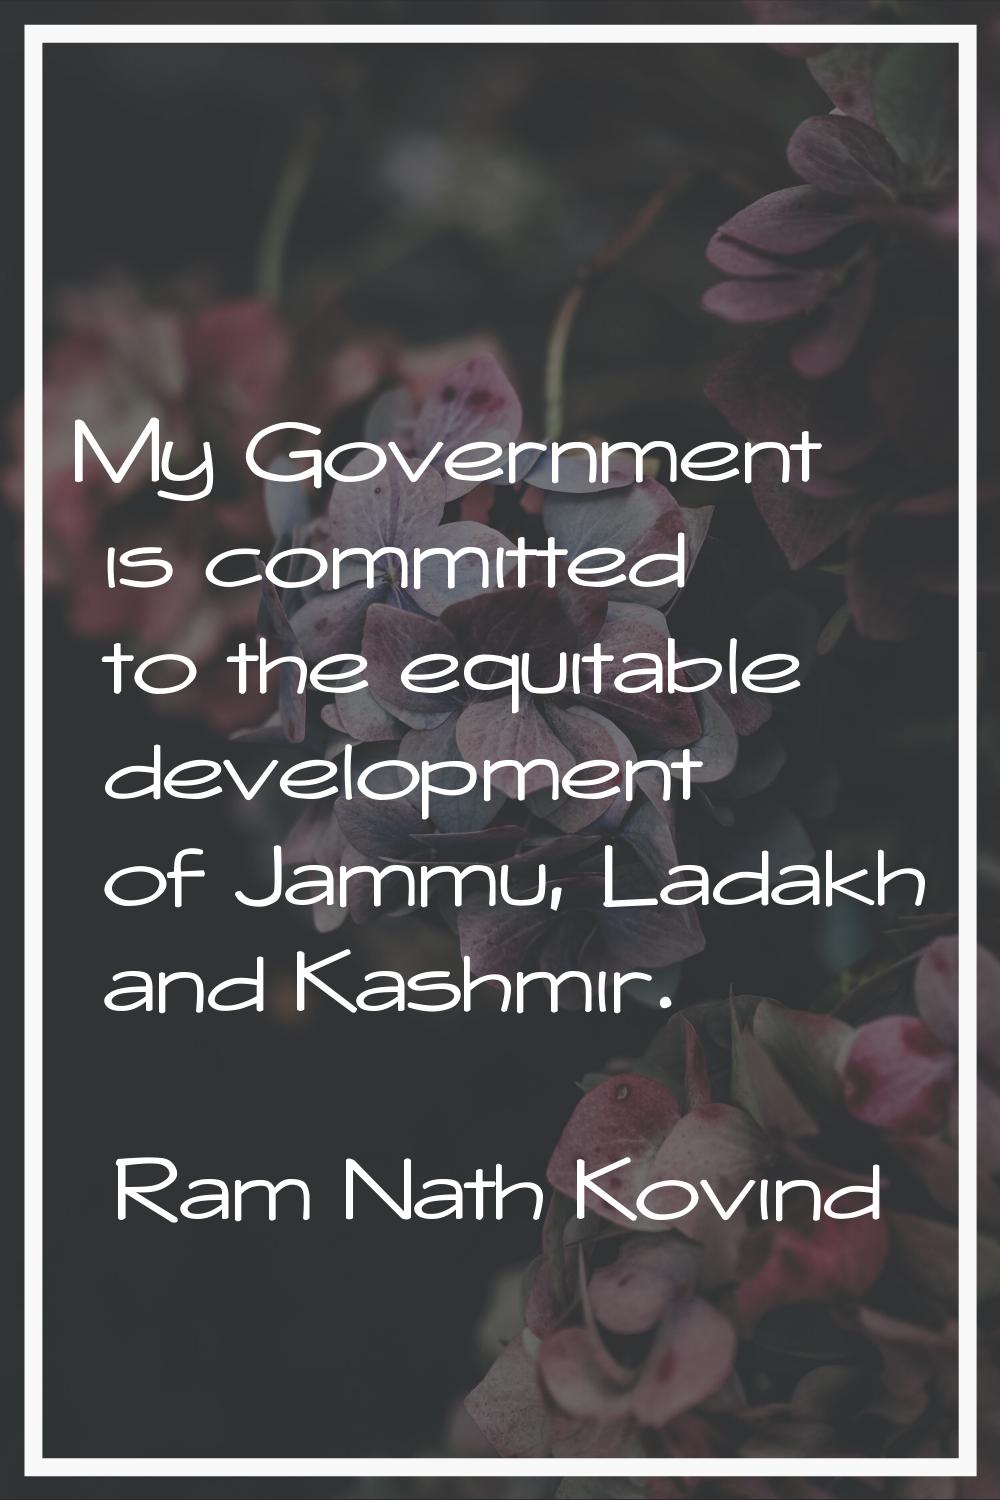 My Government is committed to the equitable development of Jammu, Ladakh and Kashmir.